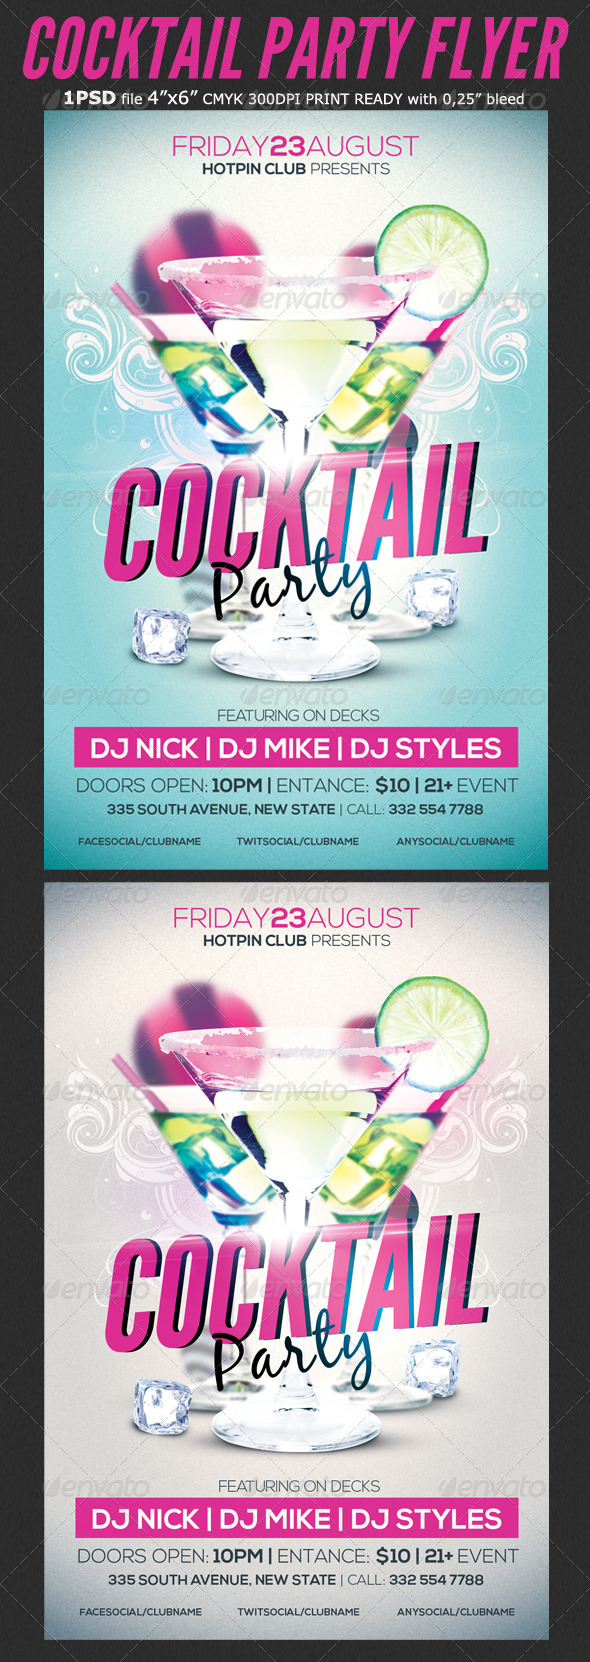 Cocktail Party Flyer Template 2 (Clubs & Parties)